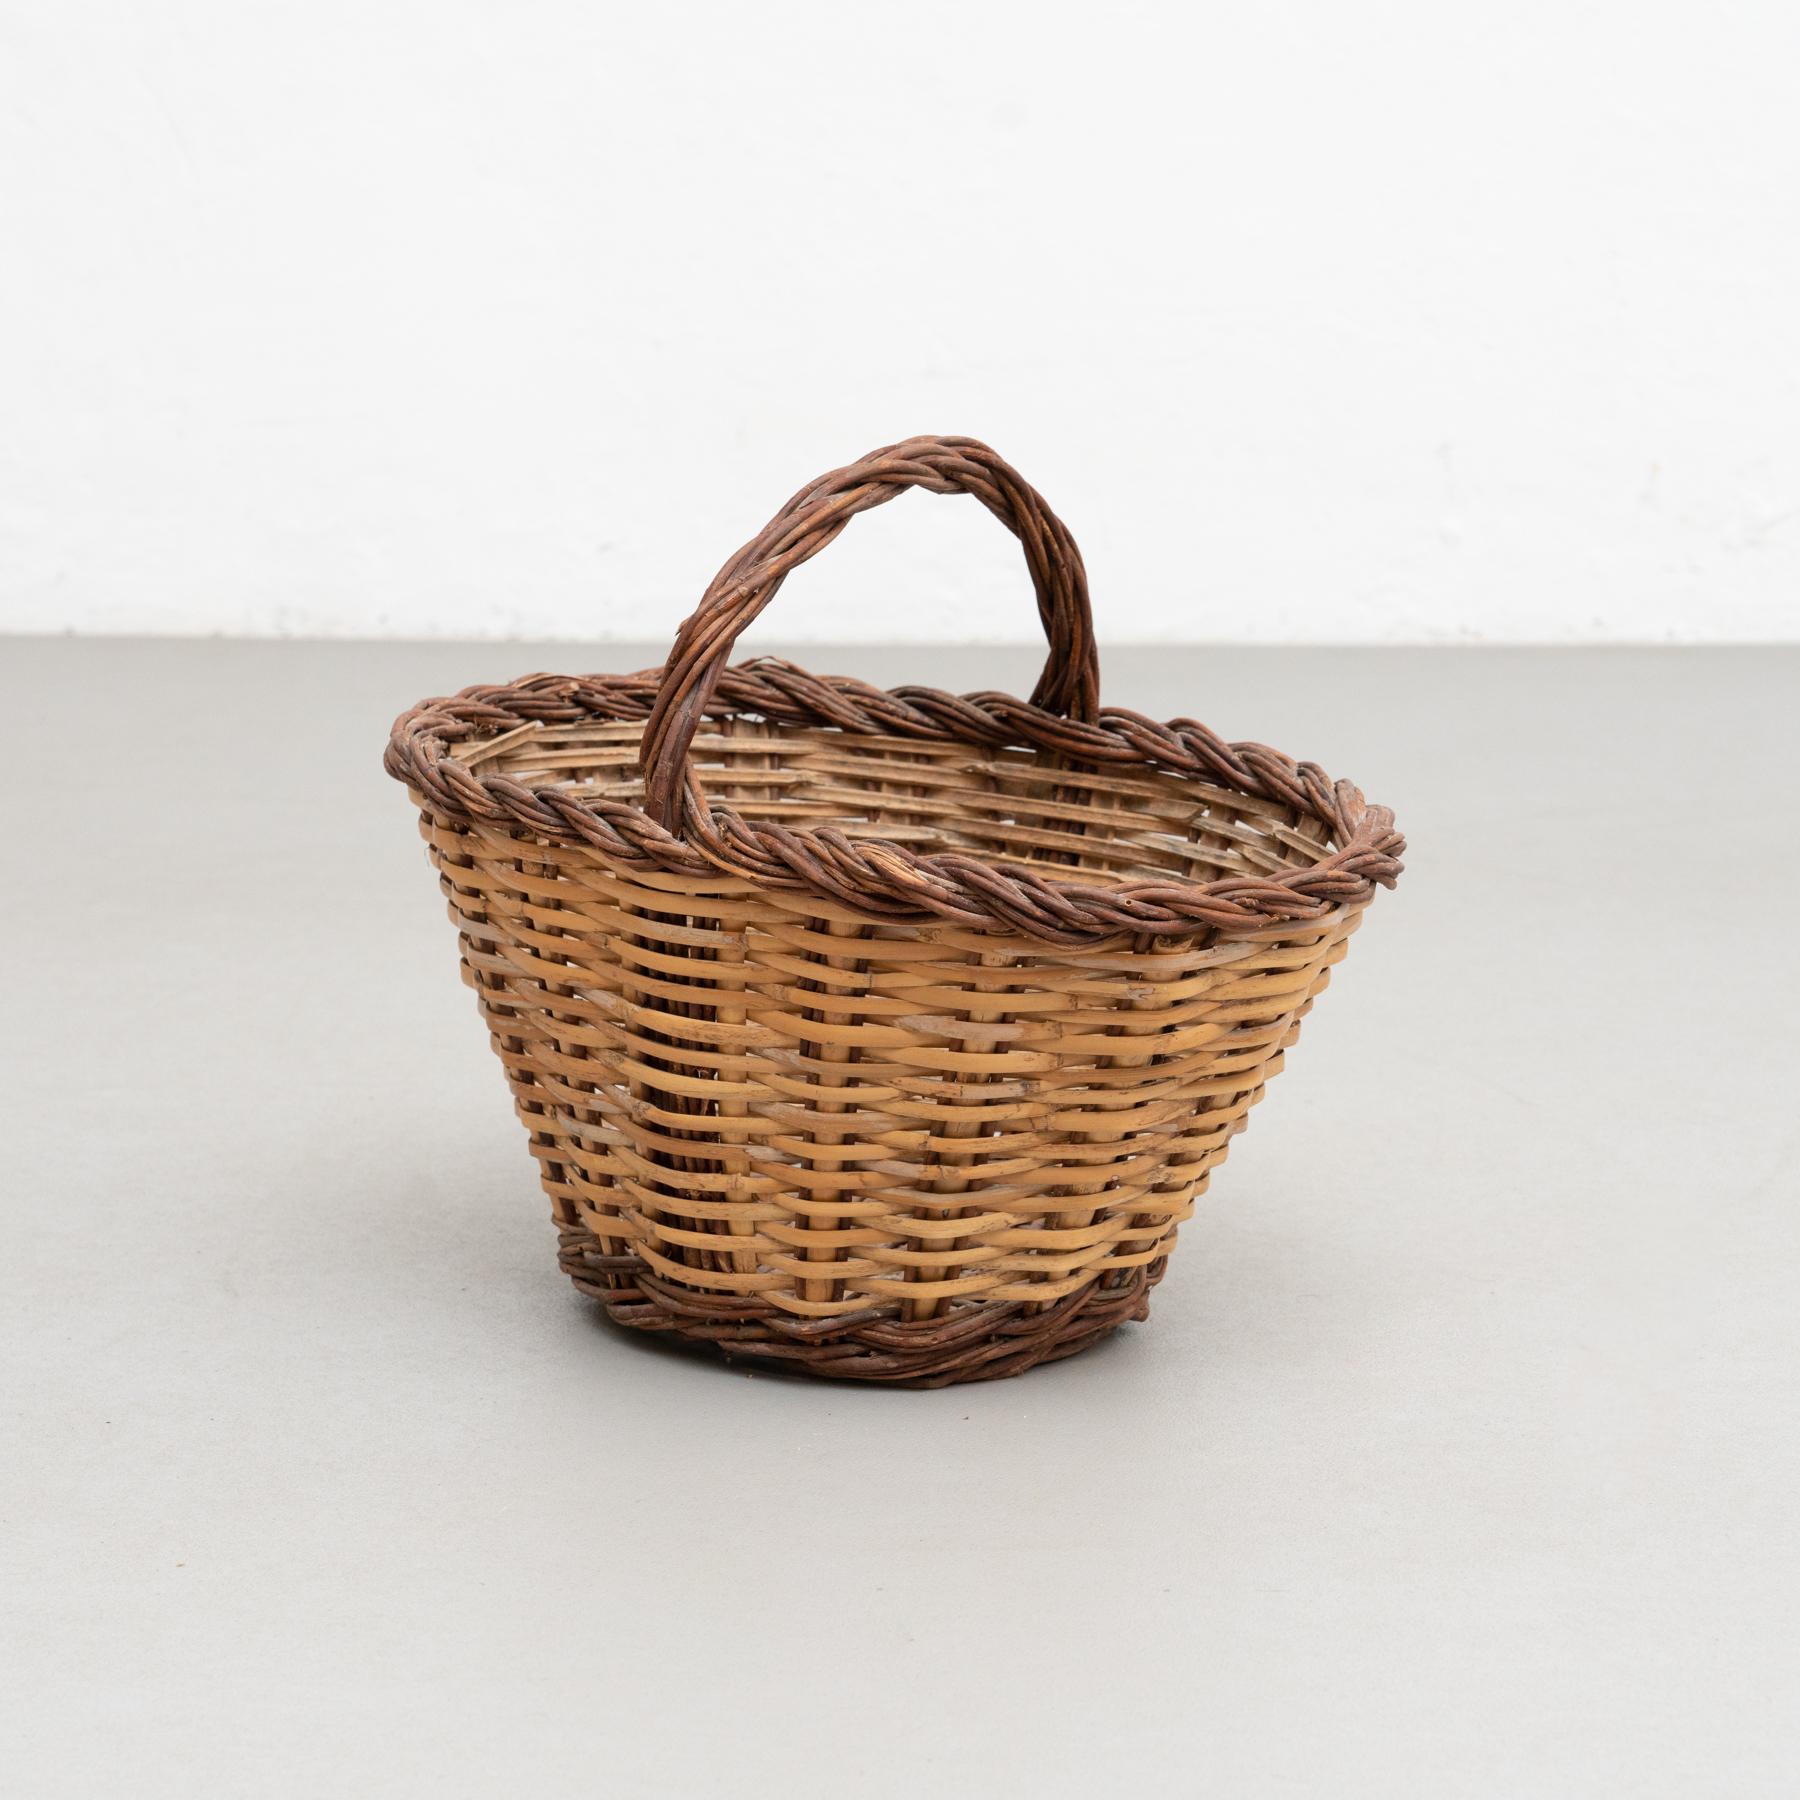 Vintage traditional woven wicker picnic basket in a classic pattern.

Made by an unknown manufacturer, in France, circa 1940

Materials:
Wicker.

In original condition, with minor wear consistent of age and use, preserving a beautiful patina.